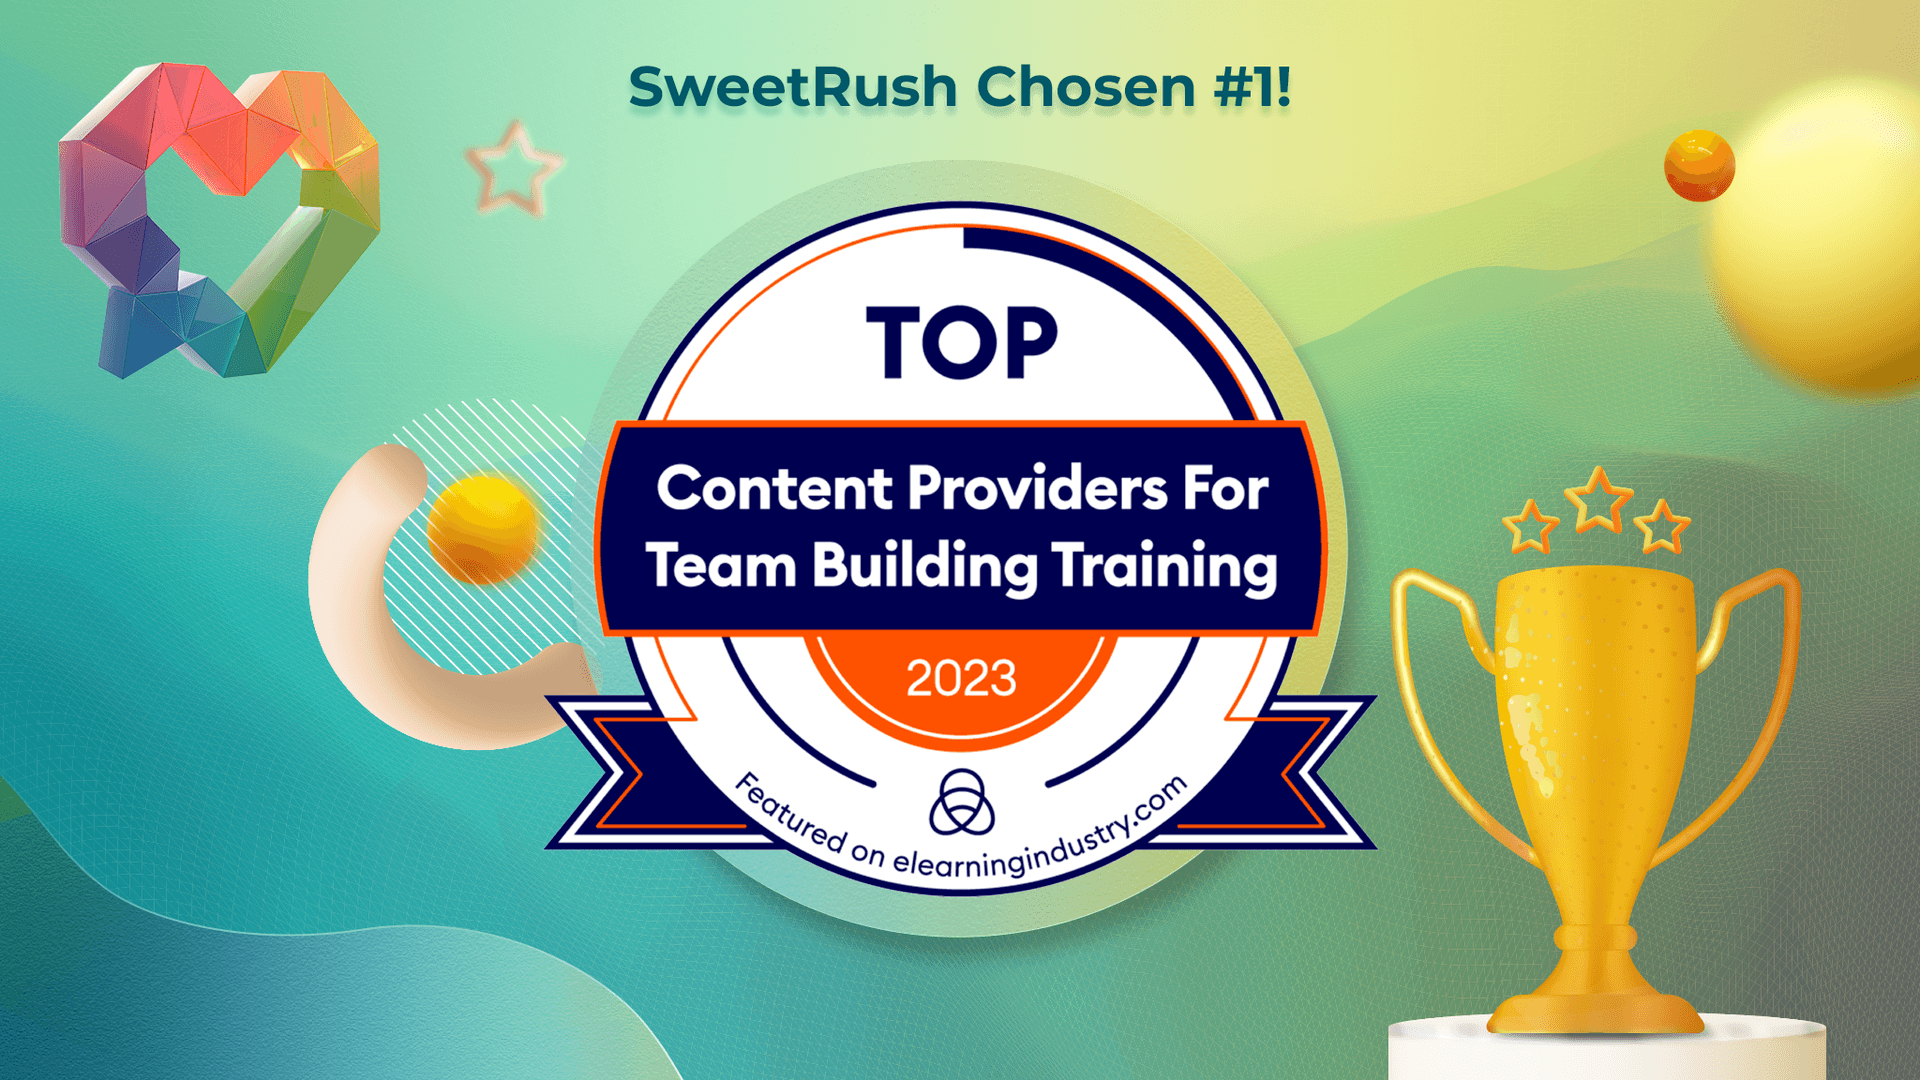 SweetRush: No. 1 Content Provider For Team Building Training